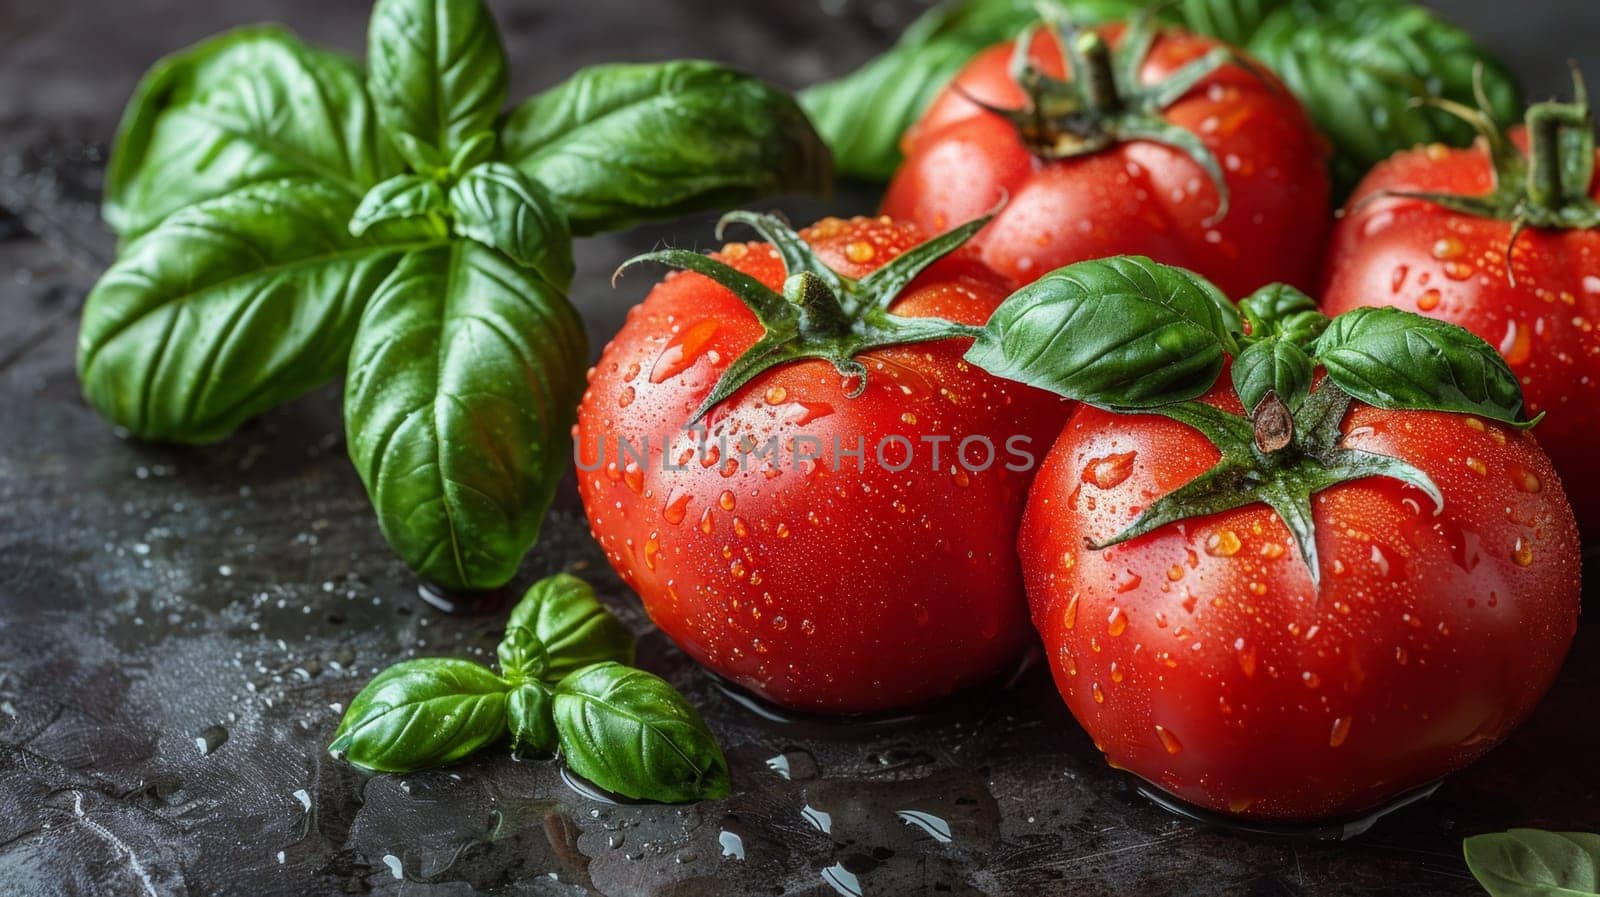 A group of tomatoes with water droplets on them and basil leaves